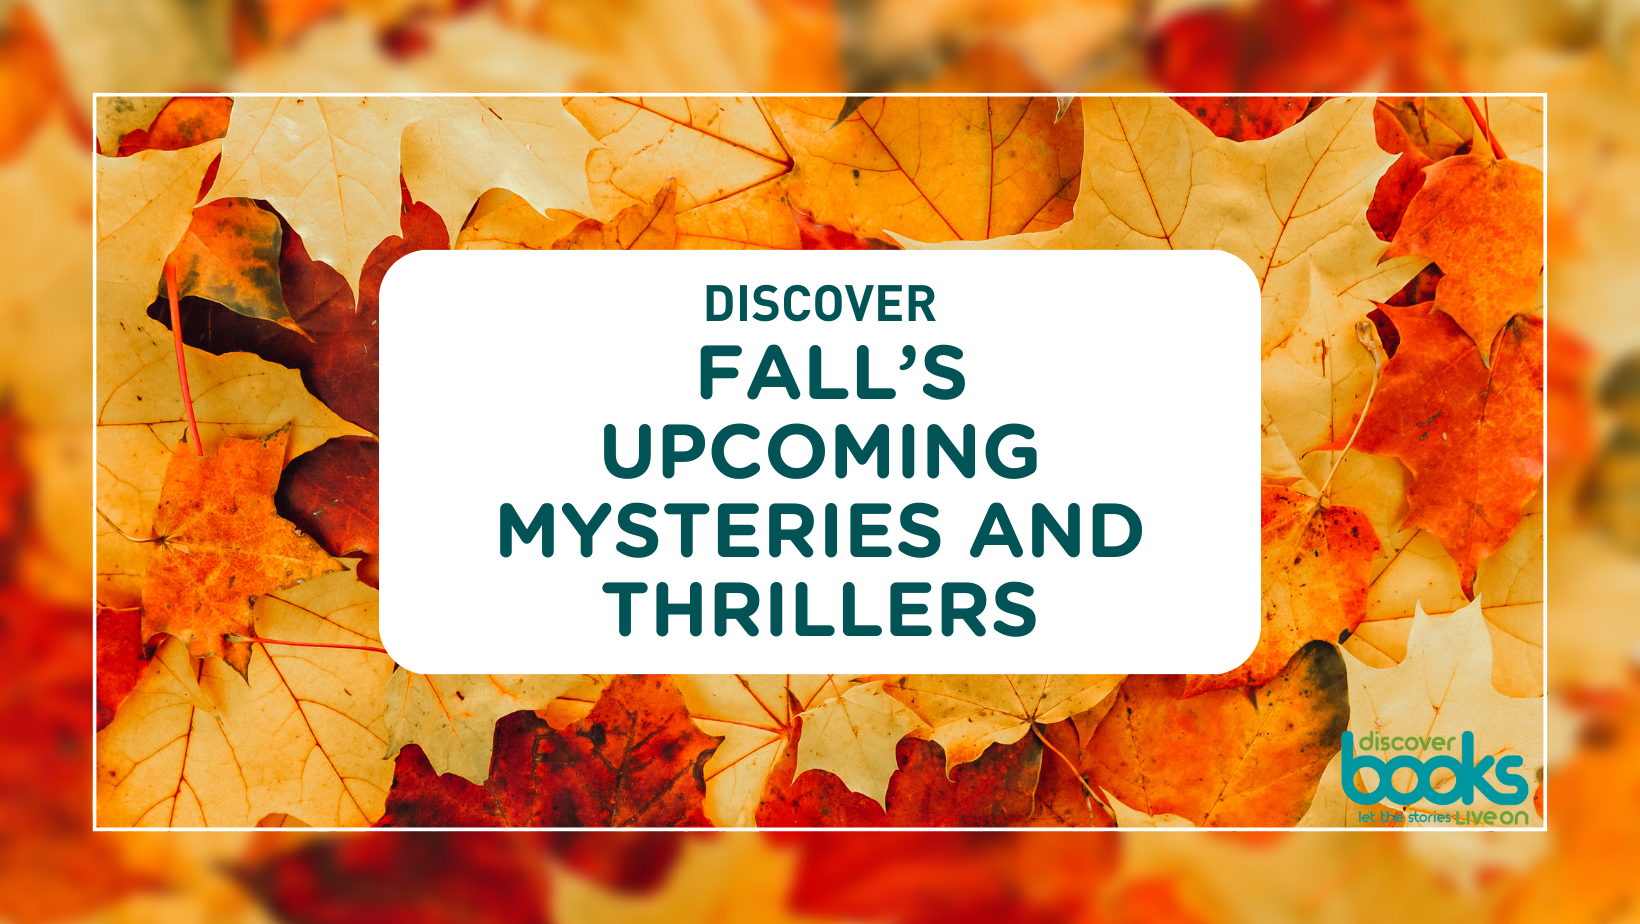 Fall's Mysteries and Thrillers